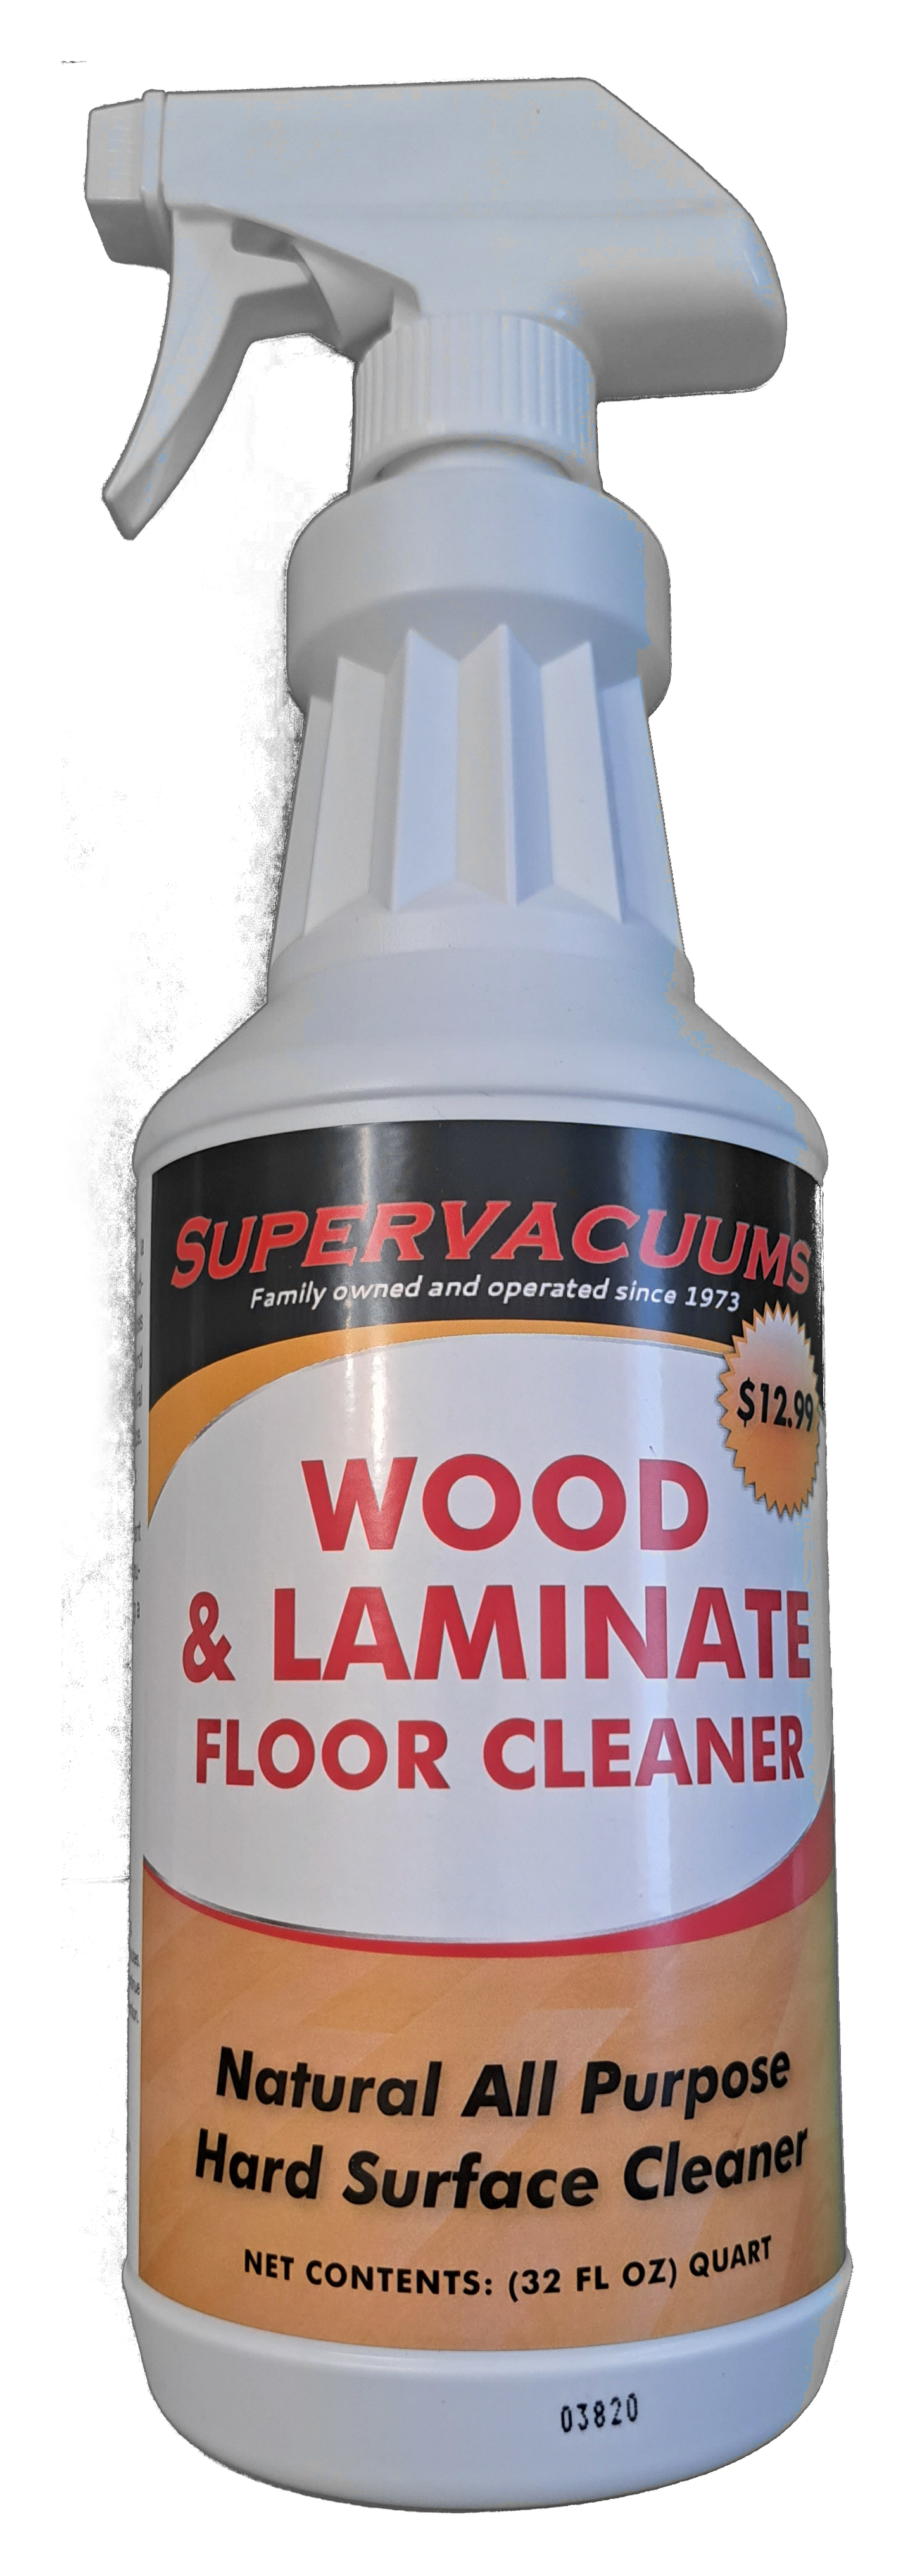 Supervacuums Natural Wood and Laminate Floor Cleaner Spray - 32 fl oz